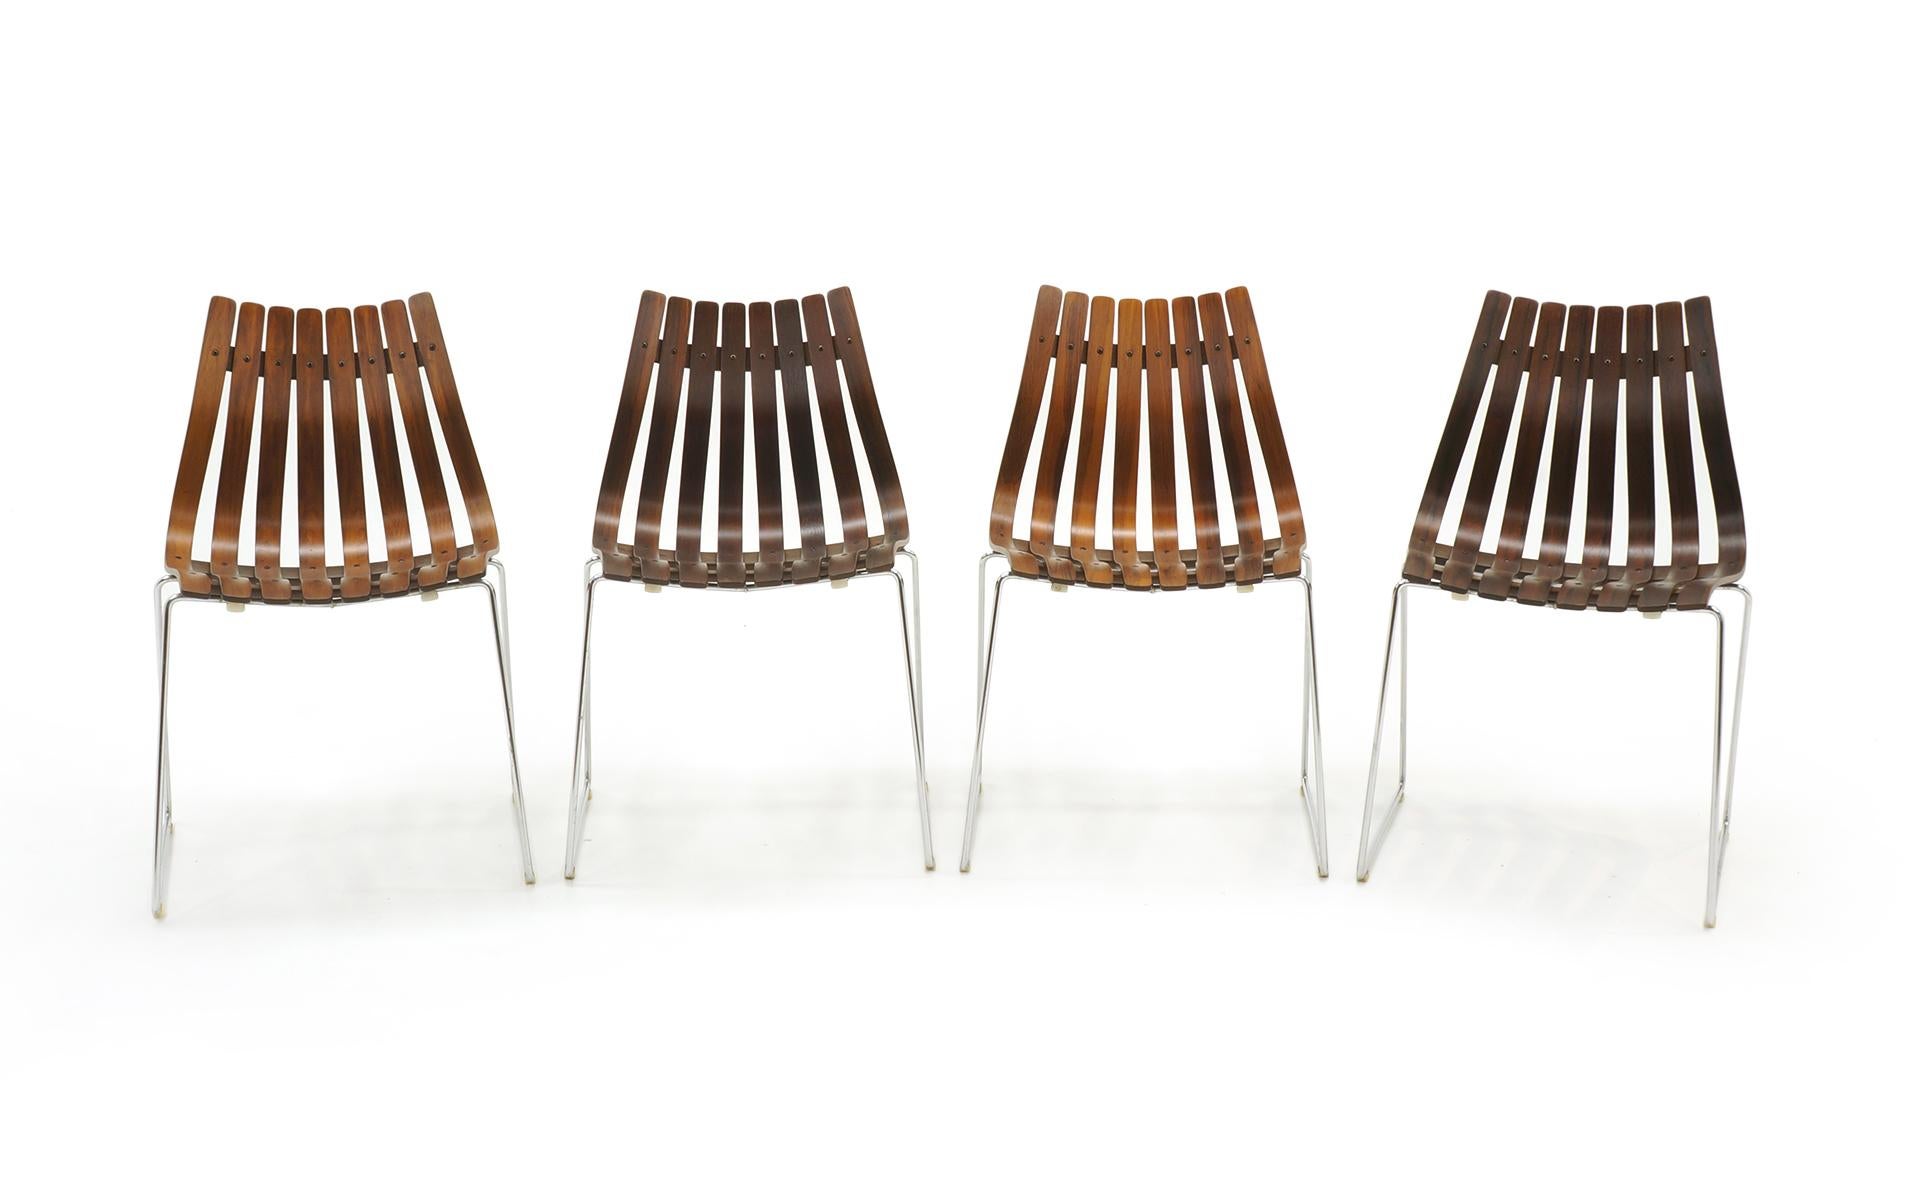 Beautiful set of 4 Hans Brattrud Scandia dining chairs in Brazilian rosewood on chromed steel bases for Hove Mobler Norway. Expertly refinished. Excellent.